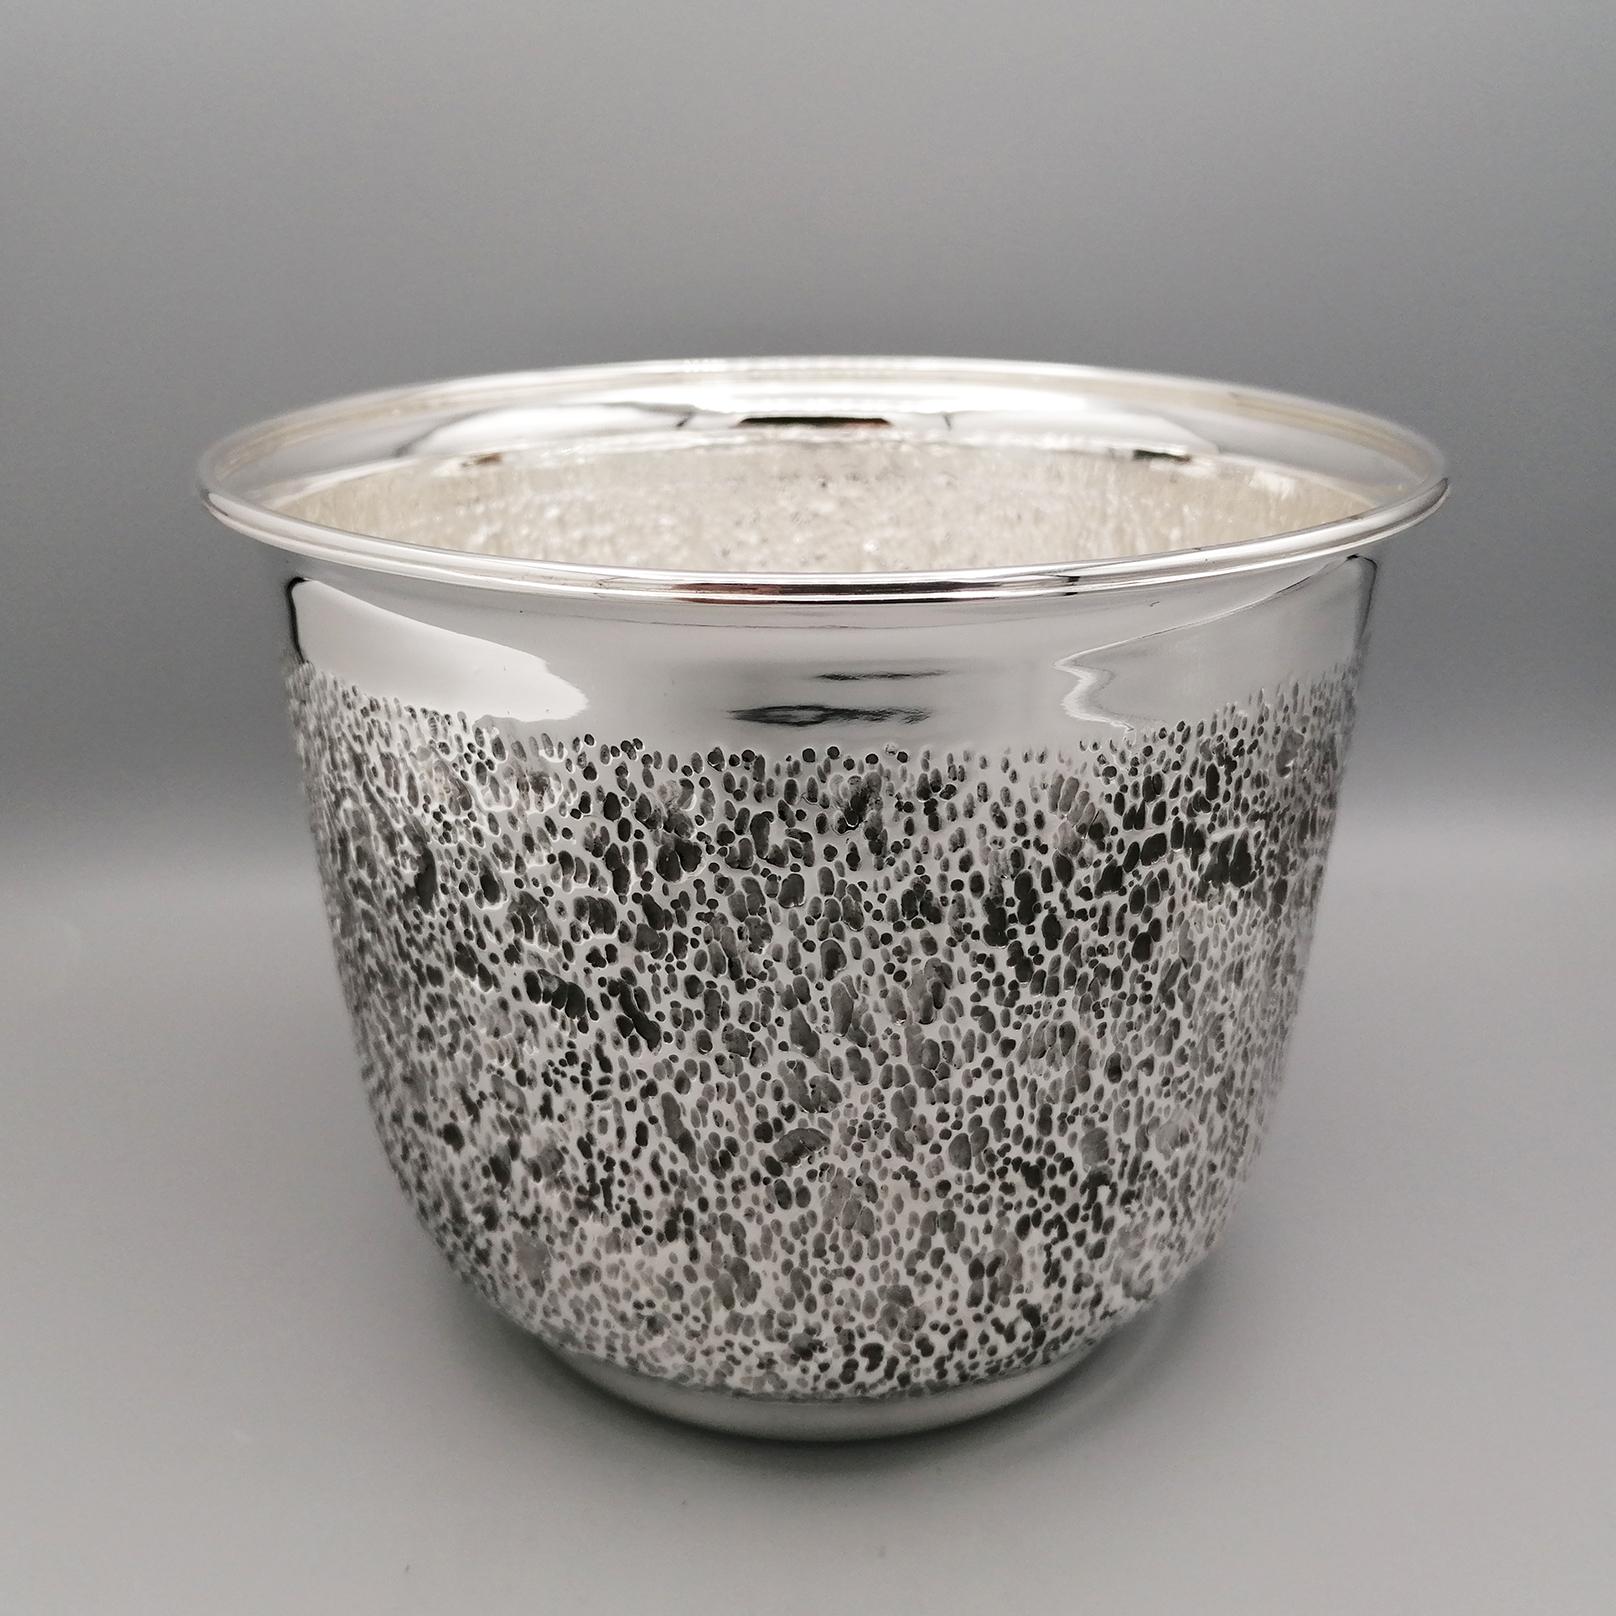 Round Flower Cachepot in Solid Sterling Silver.
Made entirely by hand, it has been finely embossed and chiseled on the central body giving it the design of a rough or rock wall.
This workmanship is interspersed with shiny parts on the upper and